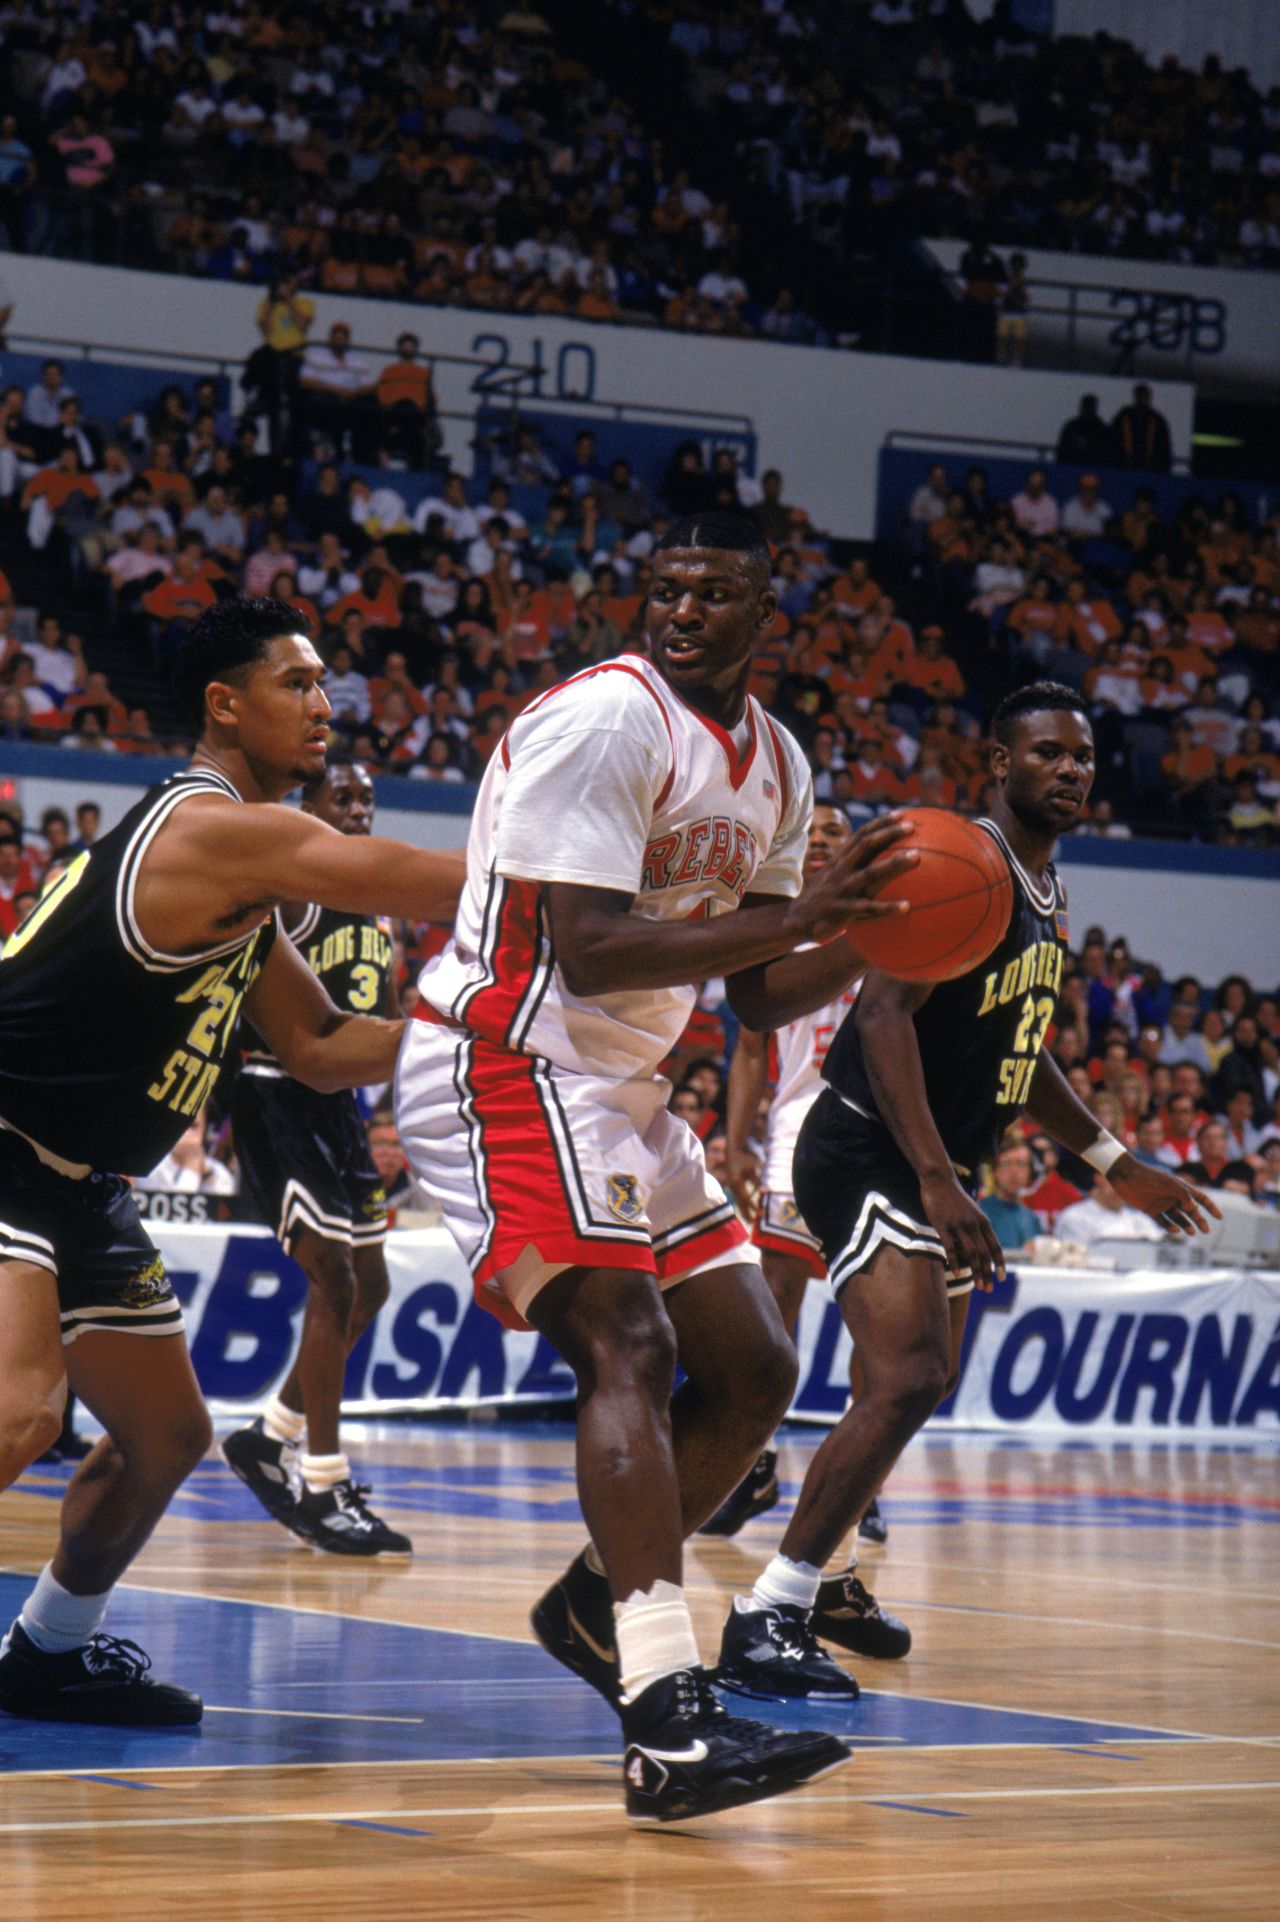 <strong>UNLV Runnin' Rebels</strong> <strong>March Madness 1991: </strong>Larry Johnson would go on to have a distinguished career with the Charlotte Hornets and New York Knicks in the NBA. But winning back-to-back titles with UNLV would have left a mark as one of the greatest college teams to ever grace the game.  